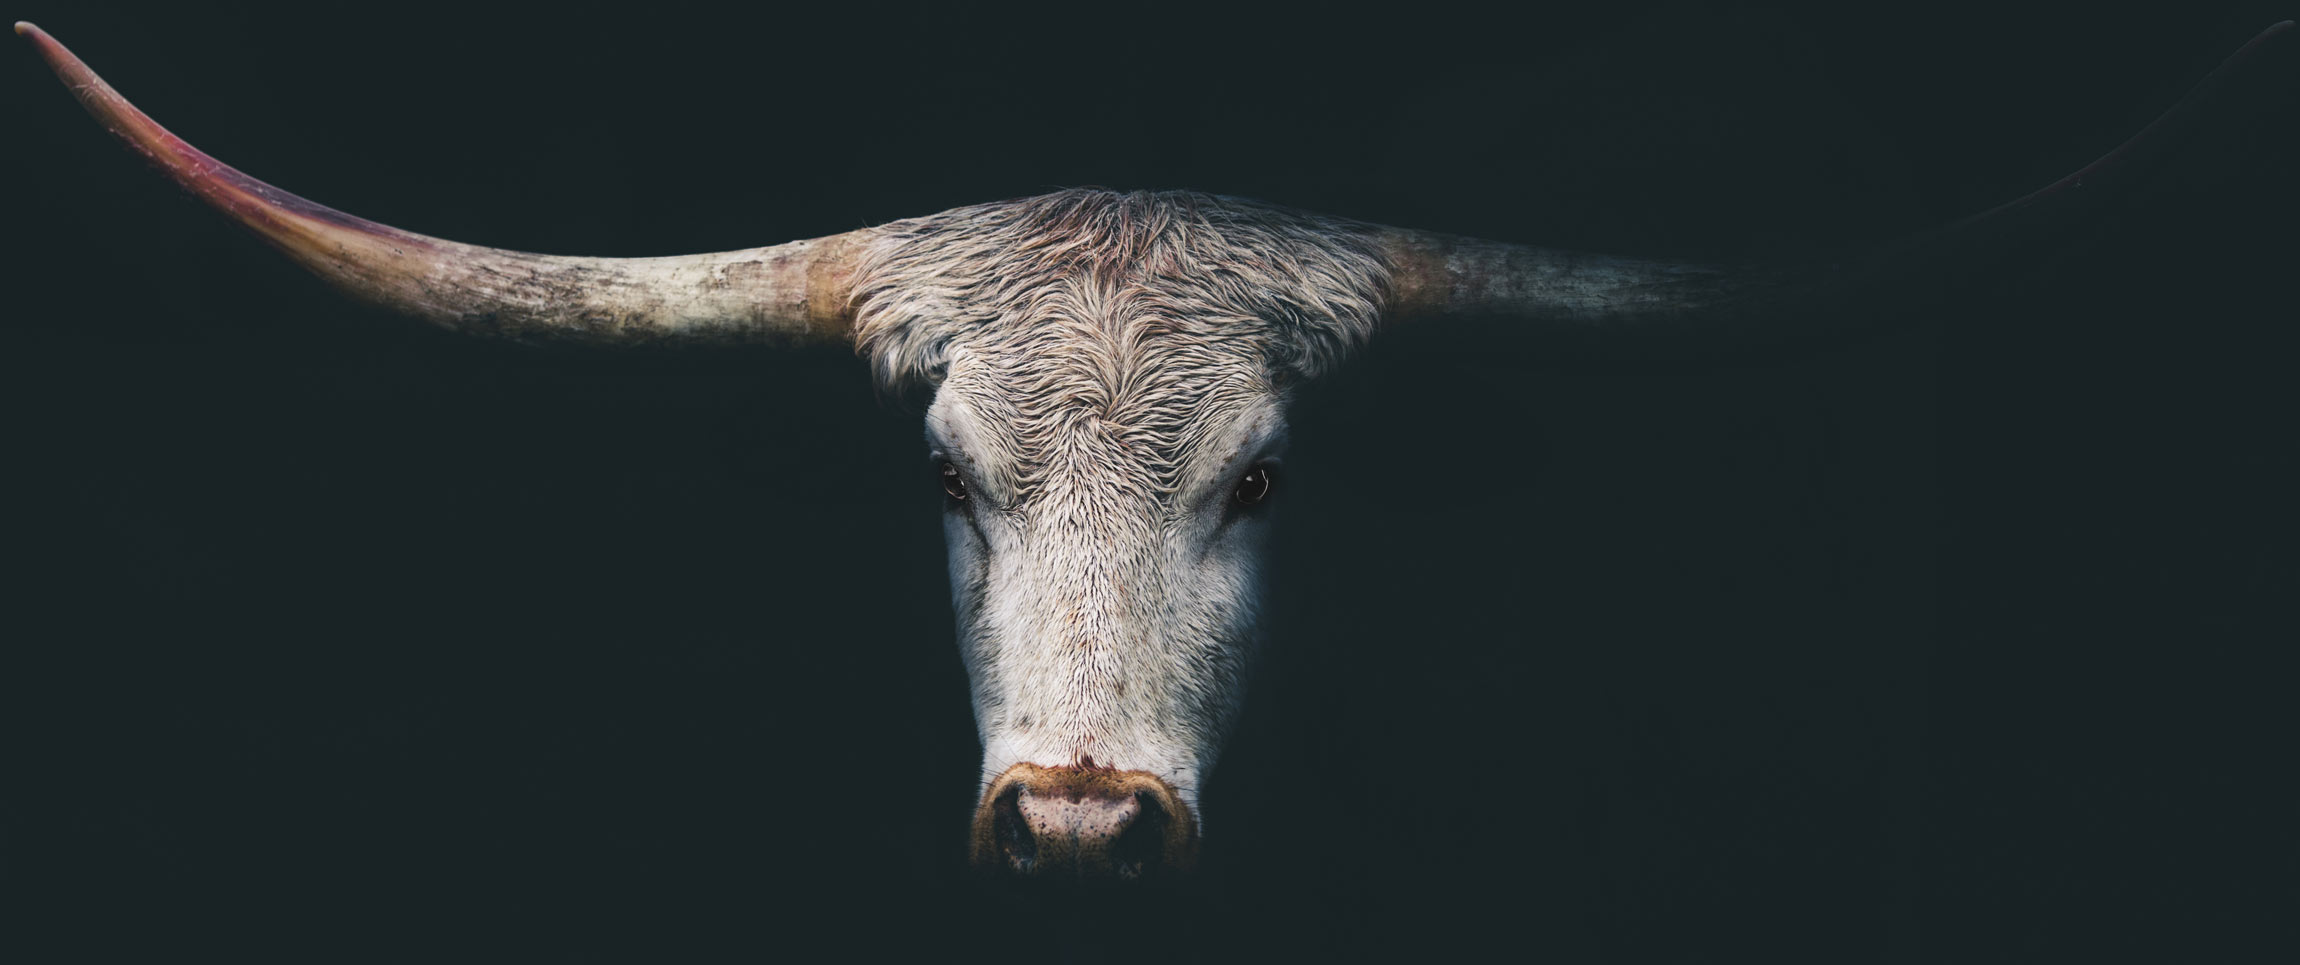 Longhorn steer on black background | What if the United States stopped eating meat